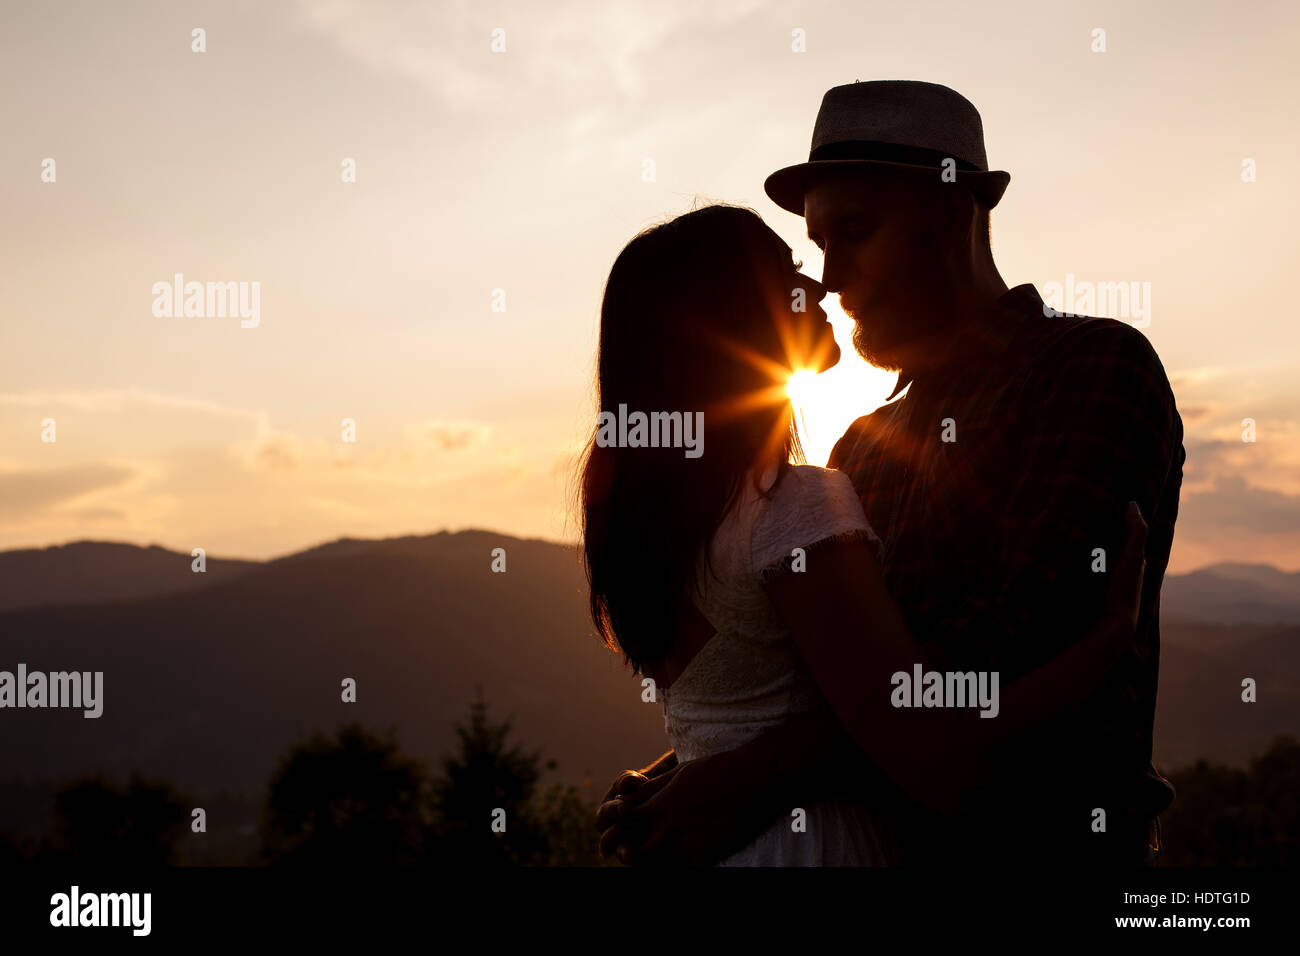 Love story. silhouettes of Couple on the sunset Stock Photo